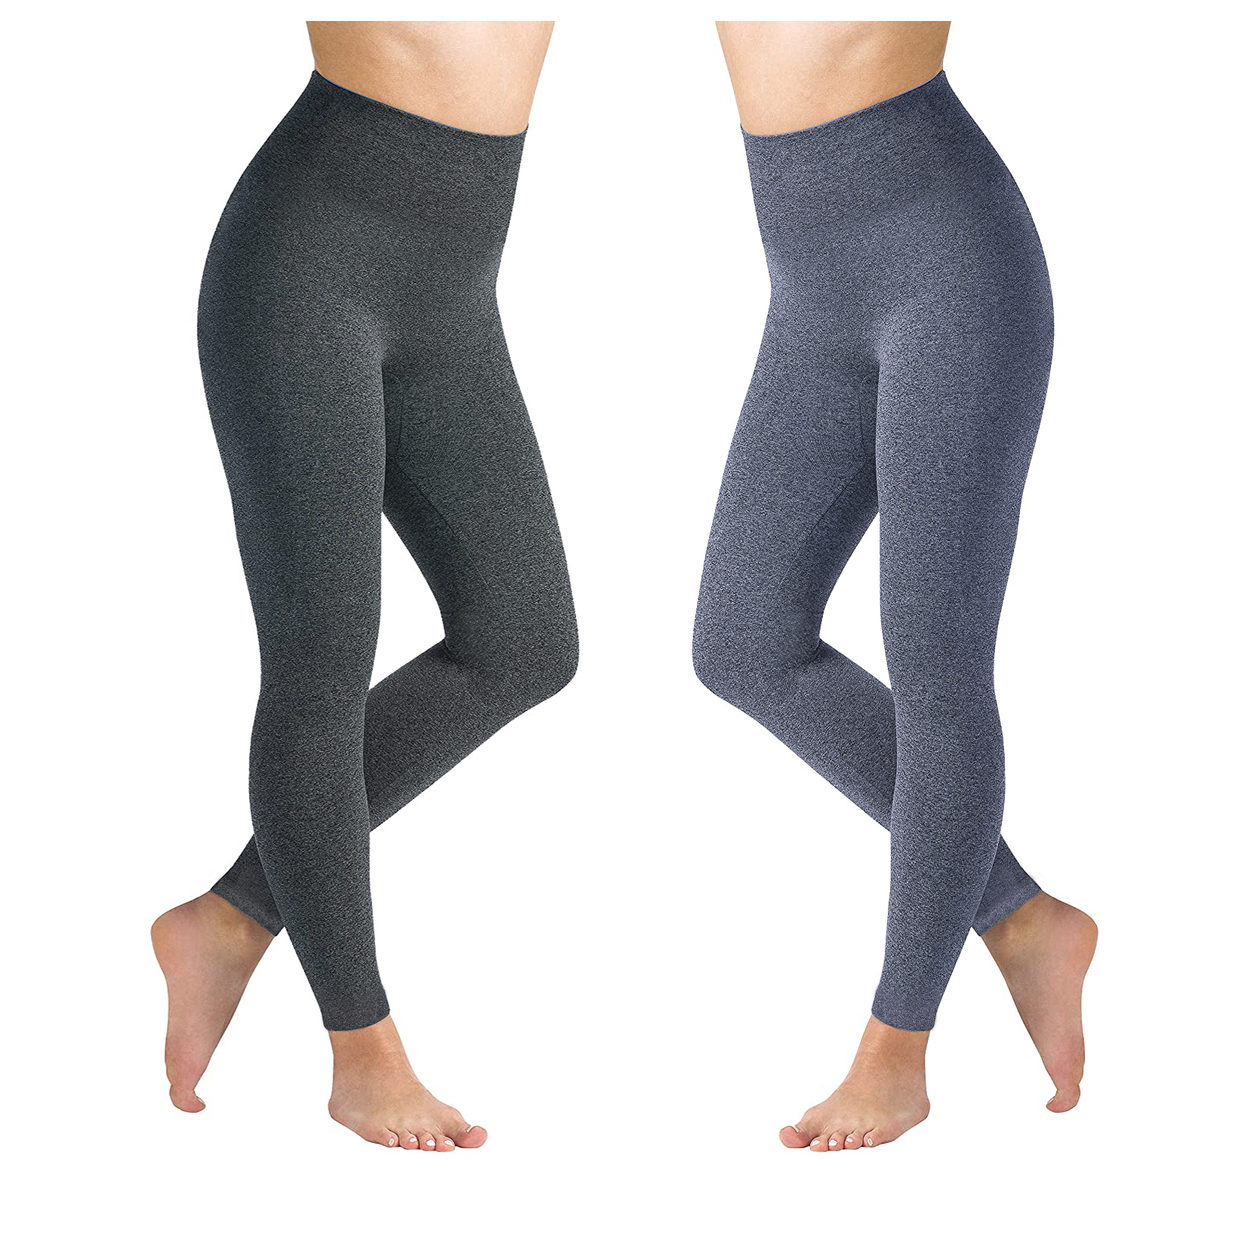 2-Pack: Women's High Waisted Ultra Soft Fleece Lined Warm Marled Leggings(Available In Plus Sizes) - Charcoal & Charcoal, Small